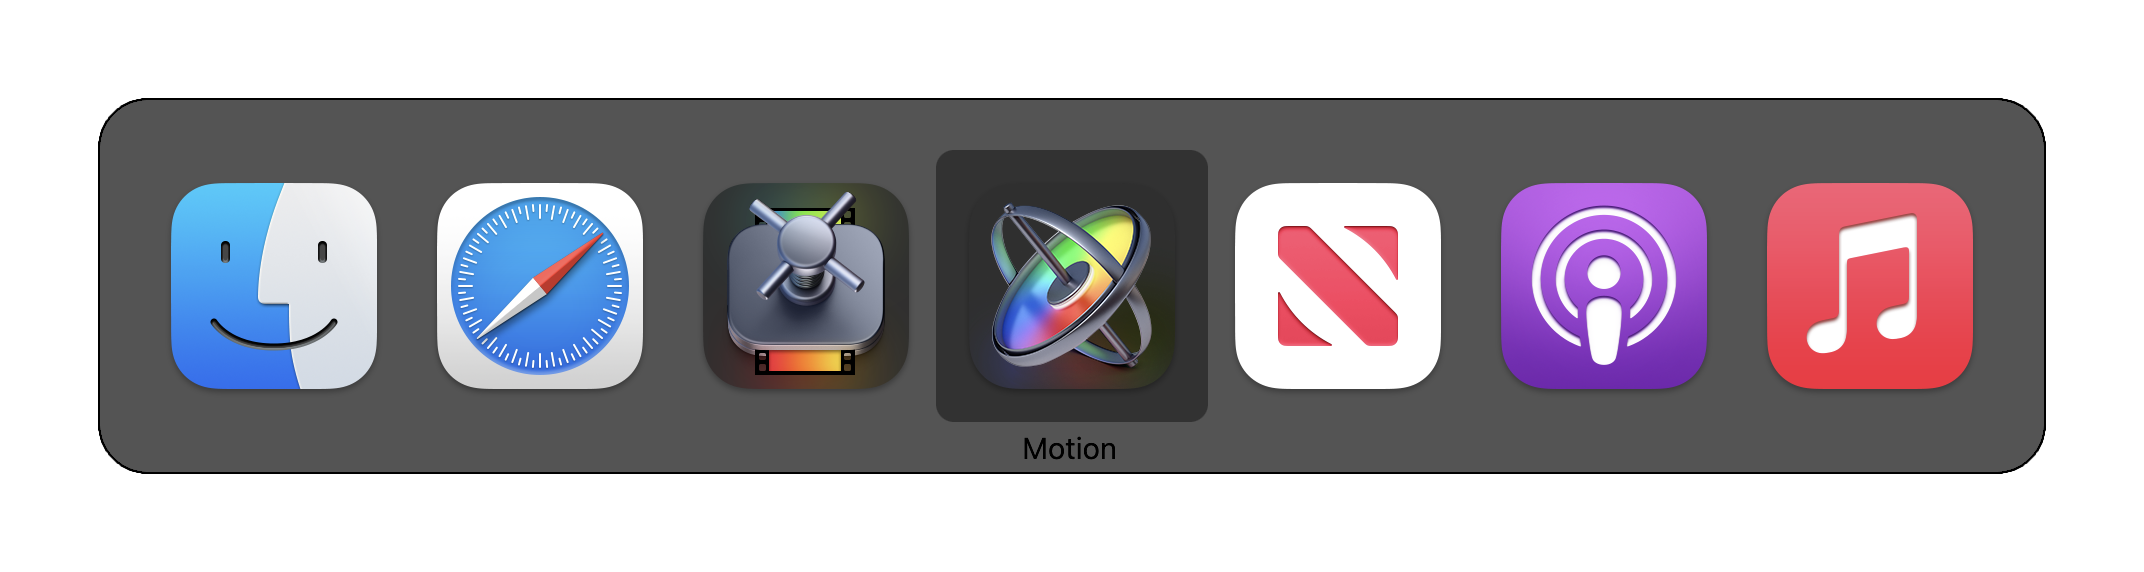 The application switcher menu showing the Motion application selected.